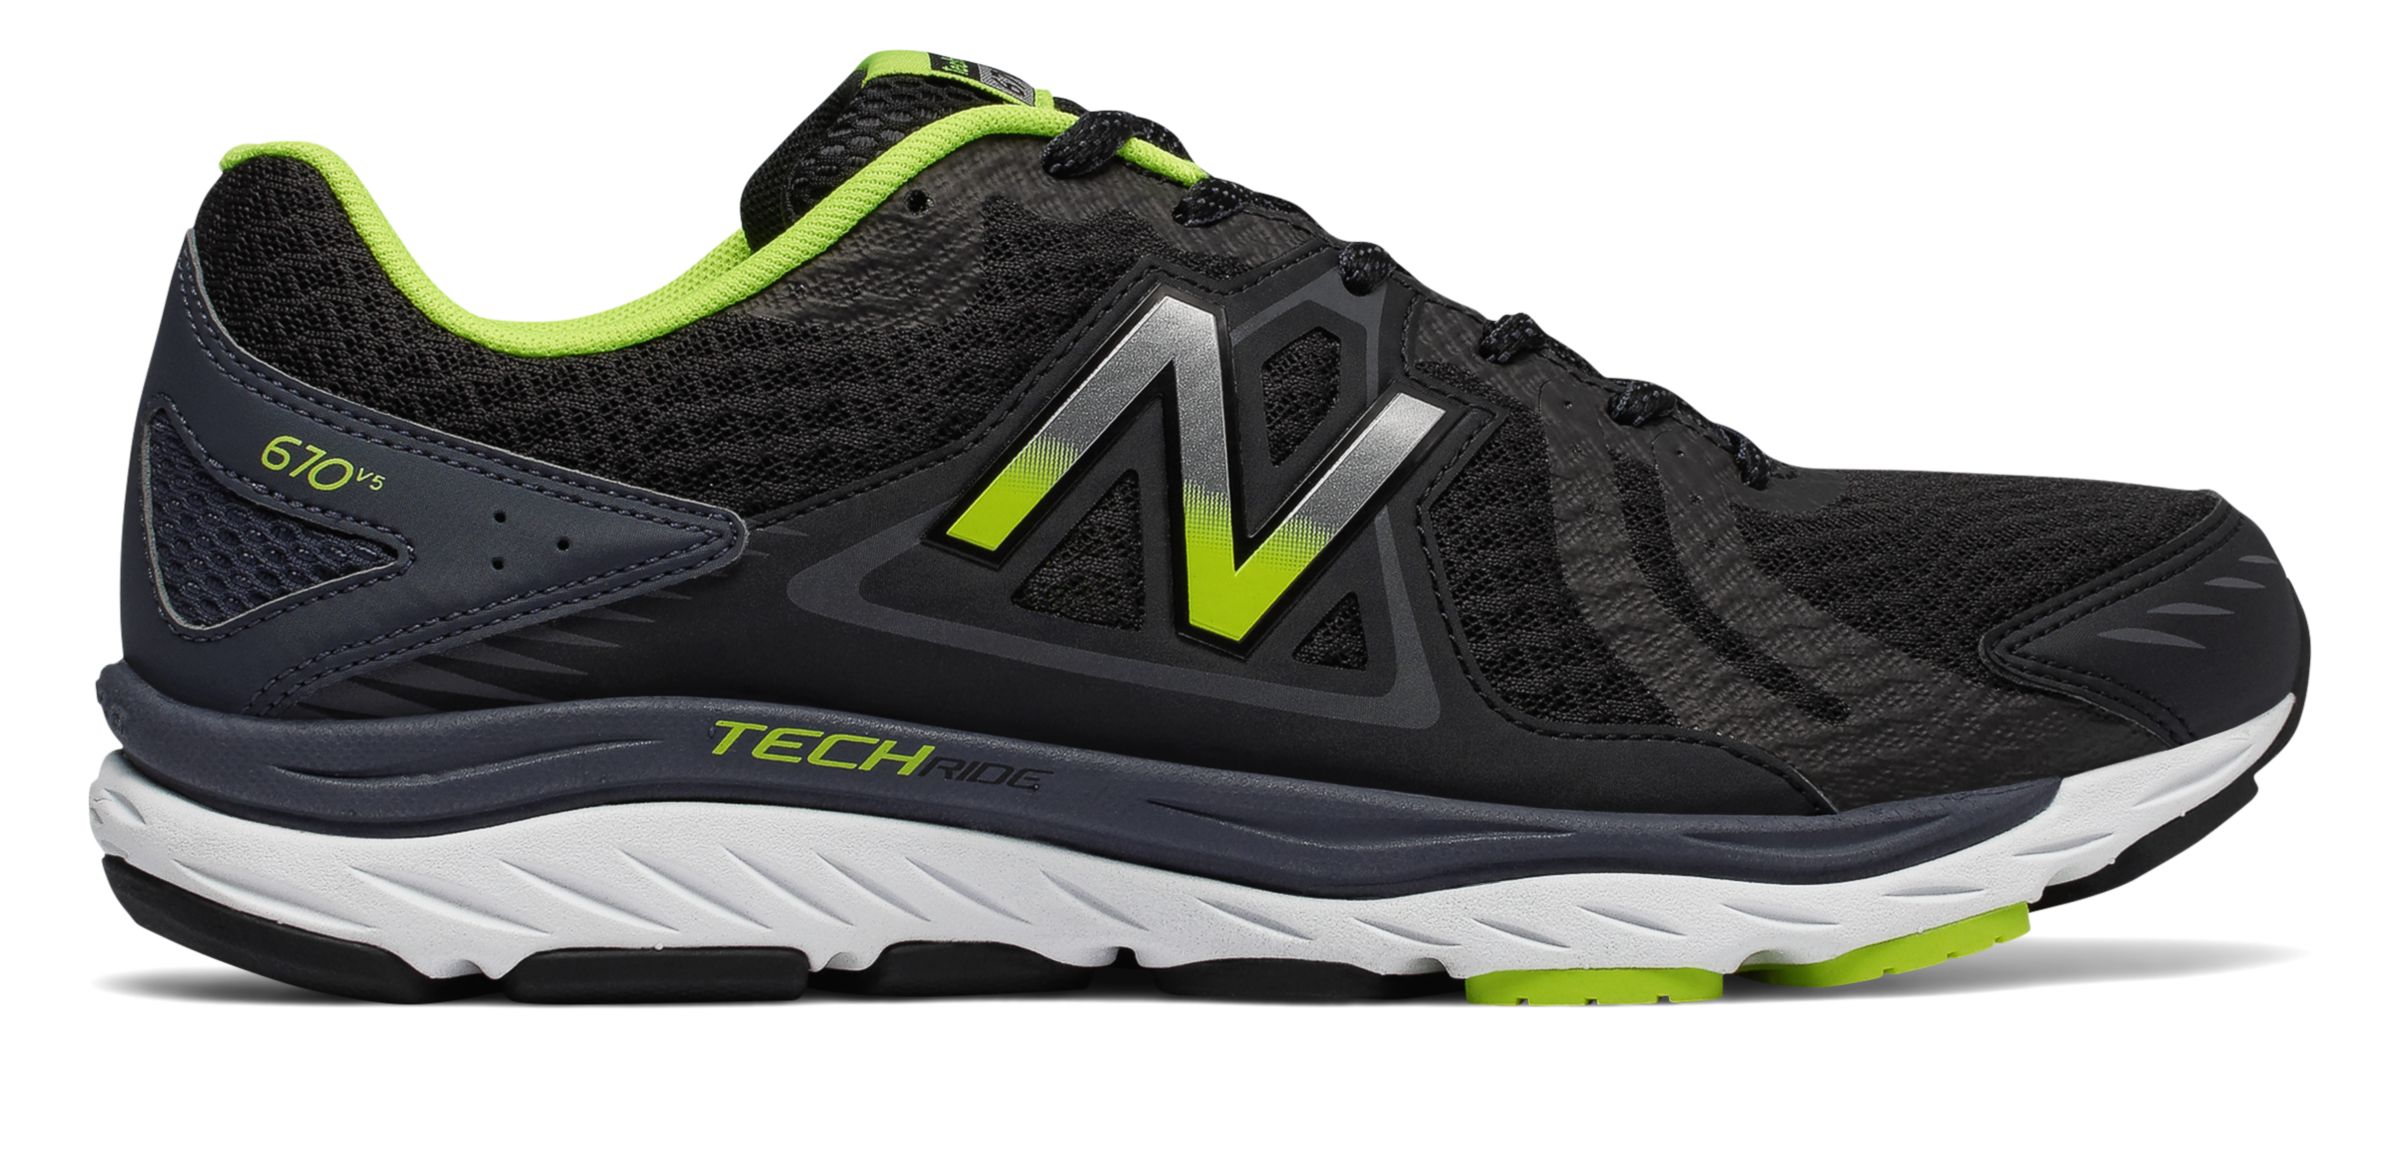 New Balance M670-V5 on Sale - Discounts Up to 40% Off on M670CB5 at Joe's New  Balance Outlet